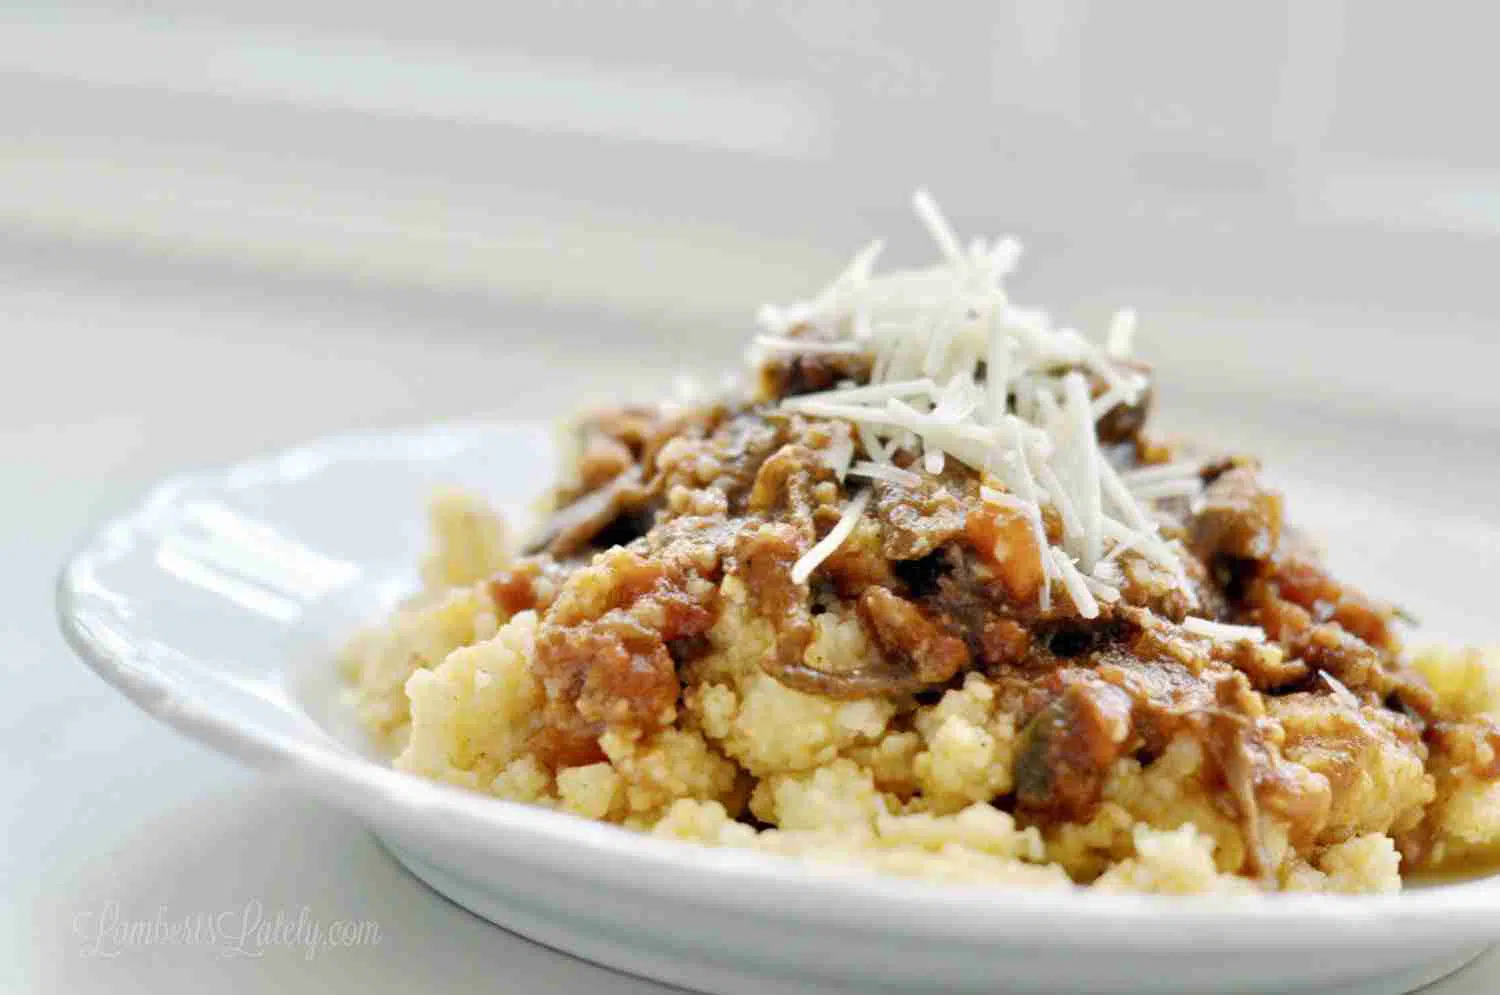 beef ragu over cheese grits, topped with shredded parmesan, on a white plate.